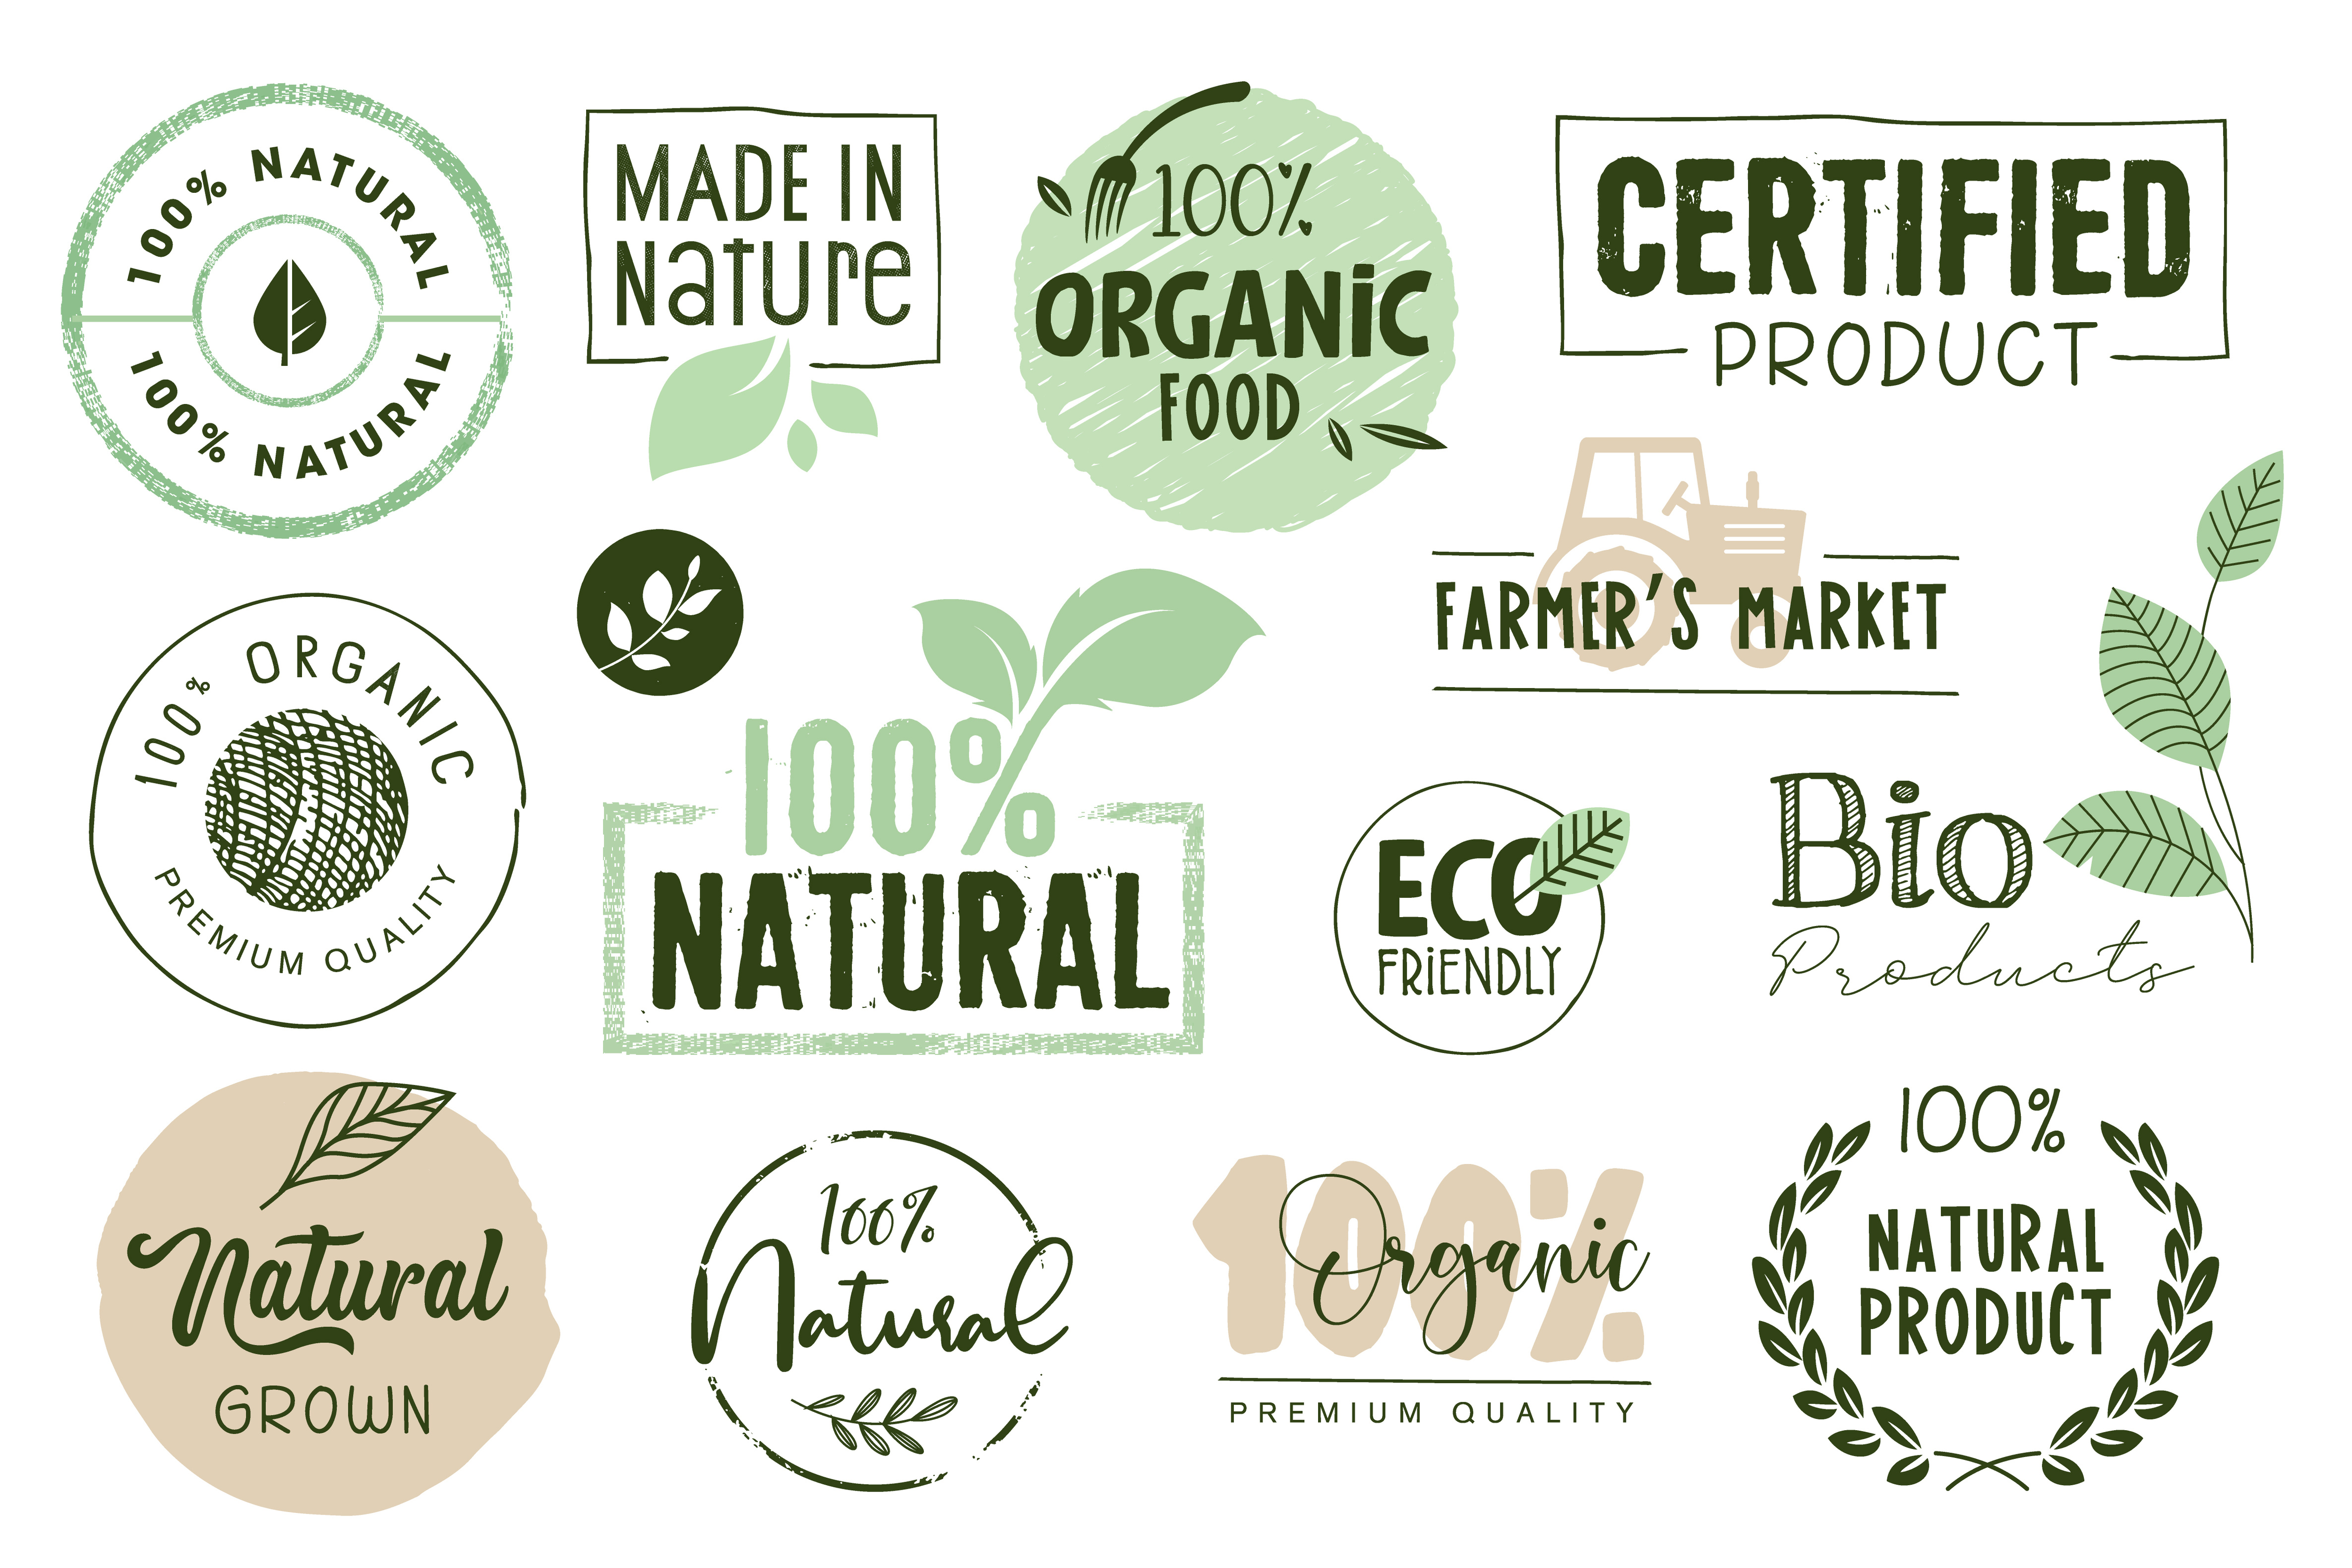 Vegan trends and building confidence in your product labelling [On-demand webinar]